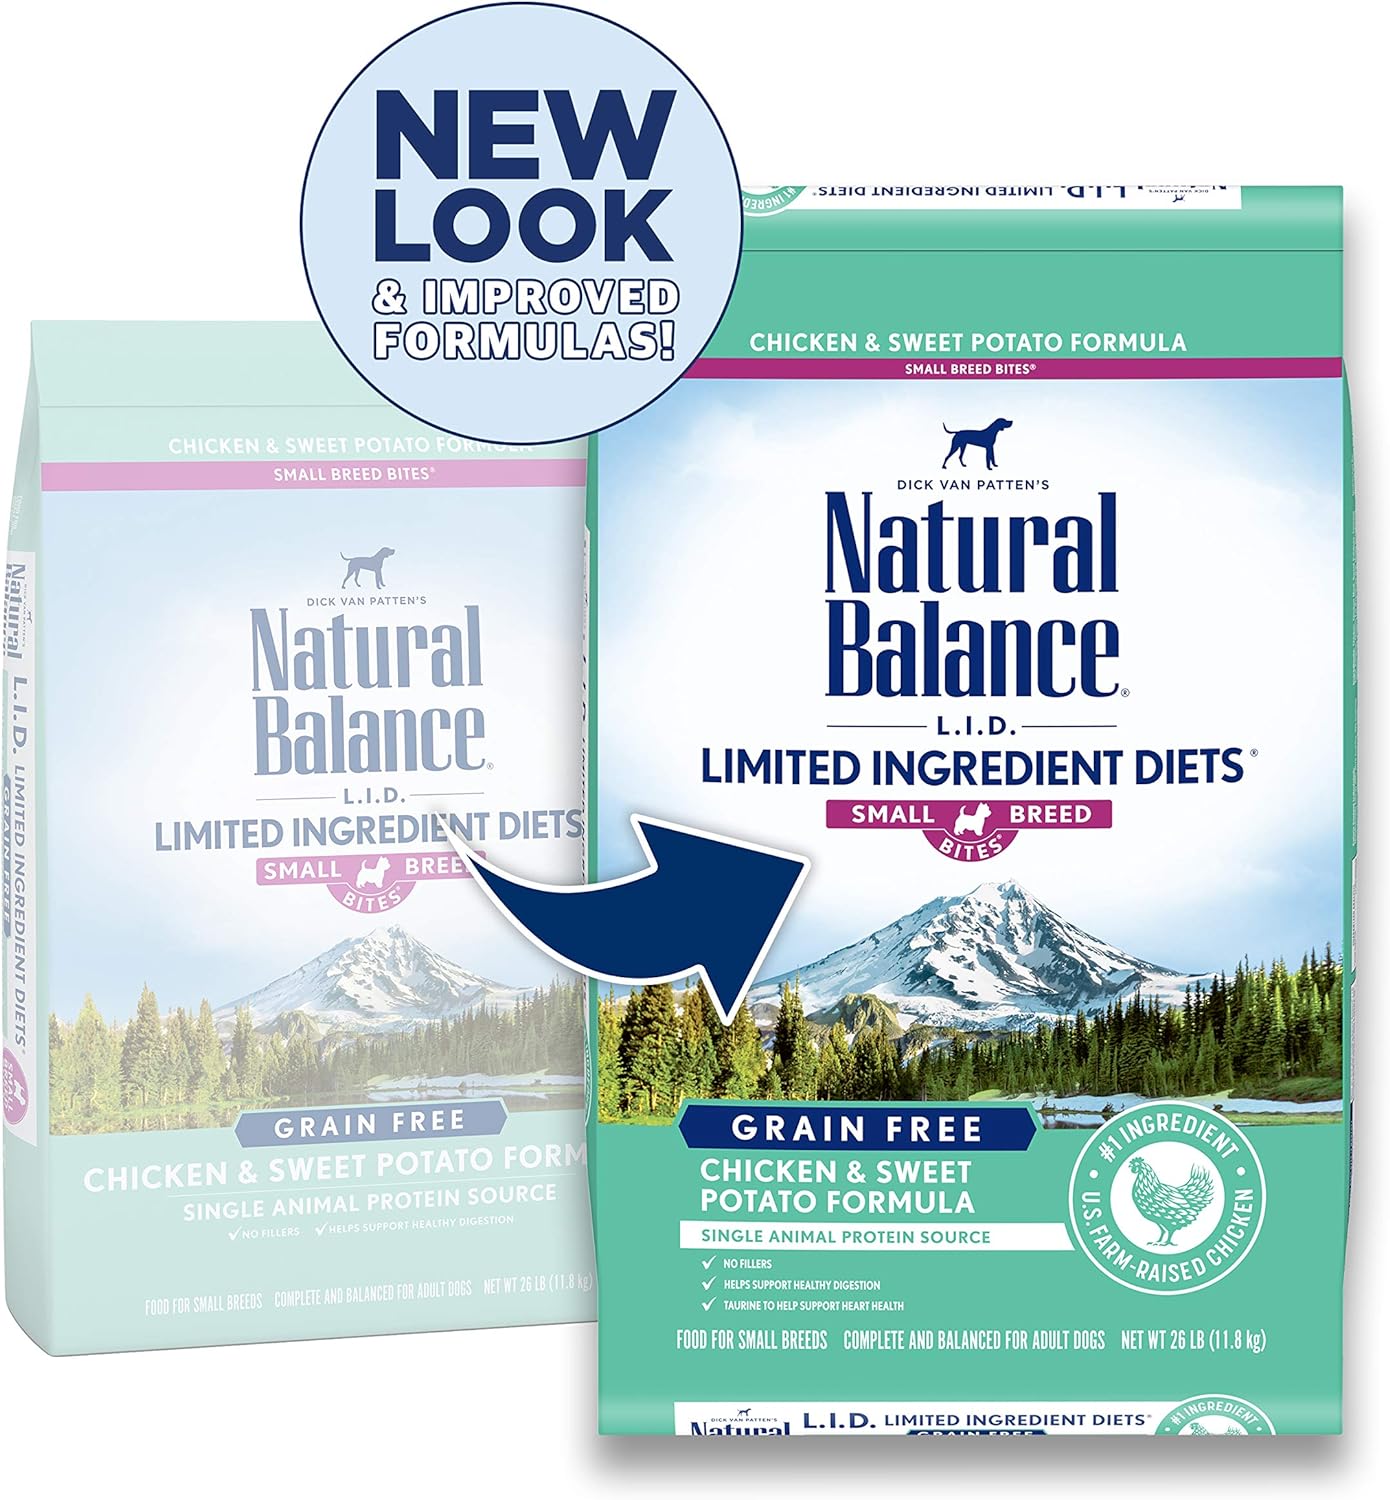 Natural Balance L.I.D. Limited Ingredient Diets Grain-Free Chicken & Sweet Potato Small Breed Bites Dry Dog Food – Gallery Image 2